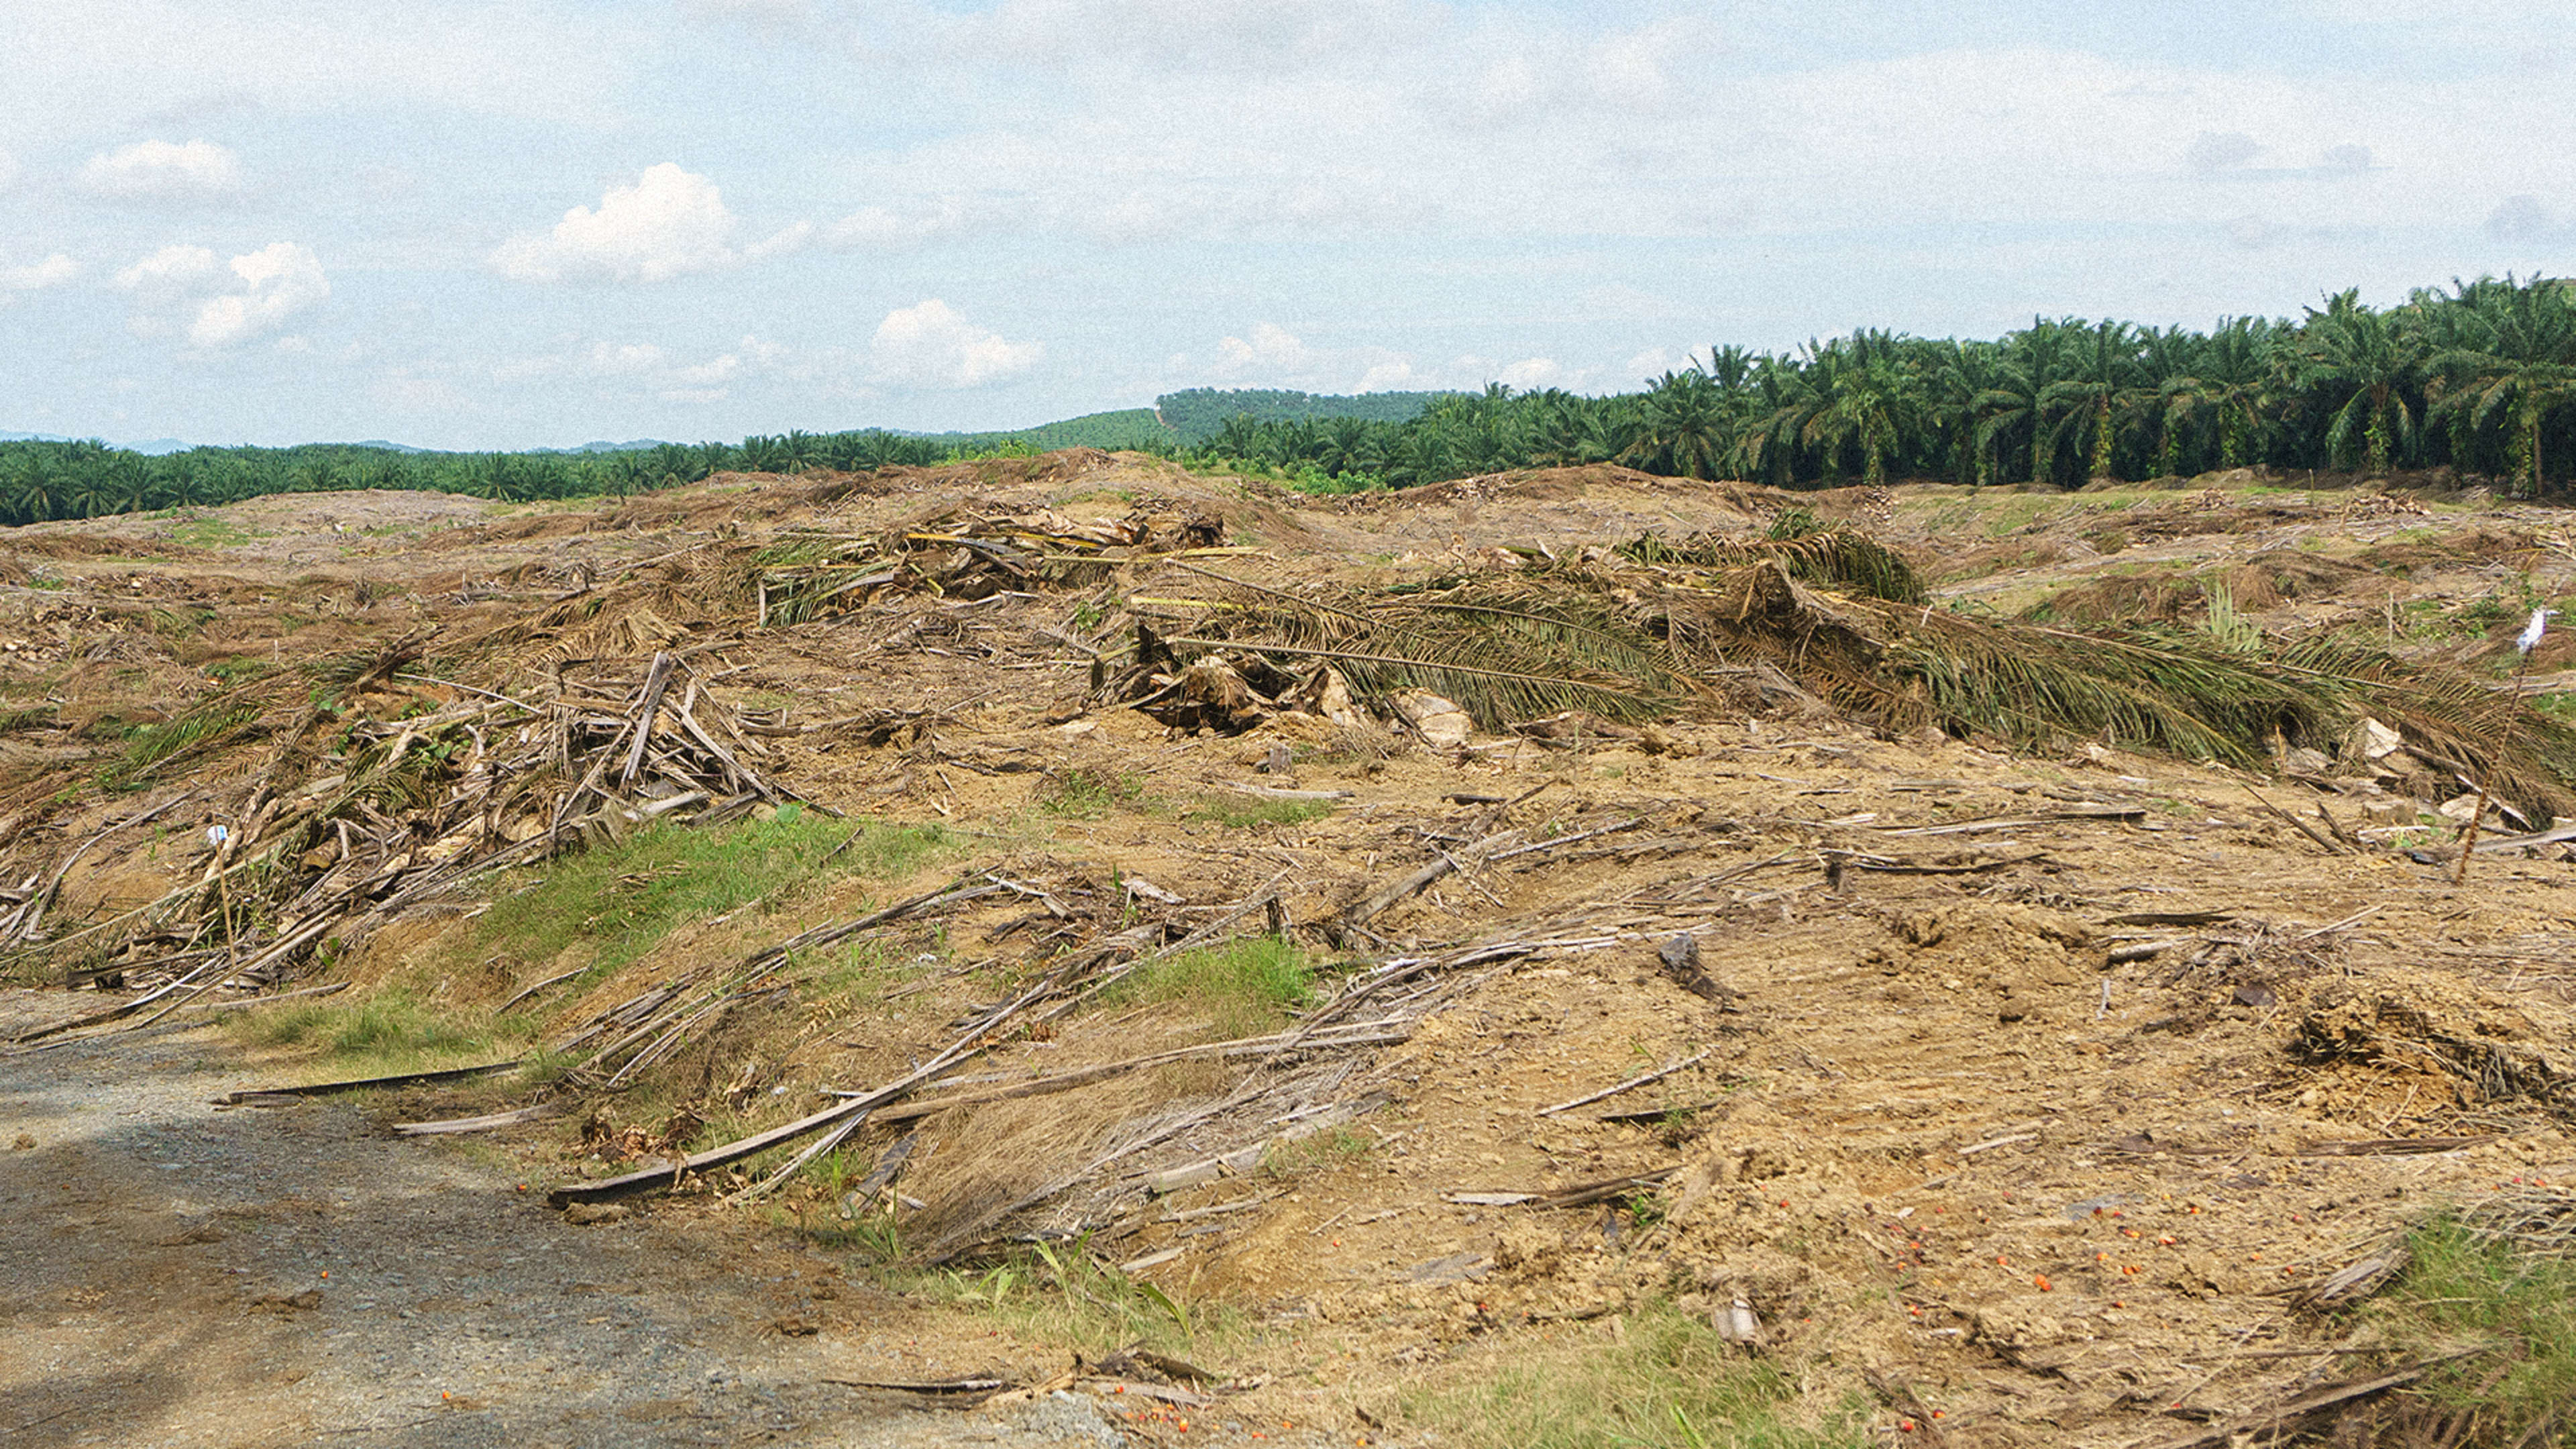 How Real Are Companies’ Promises To Stop Deforestation?